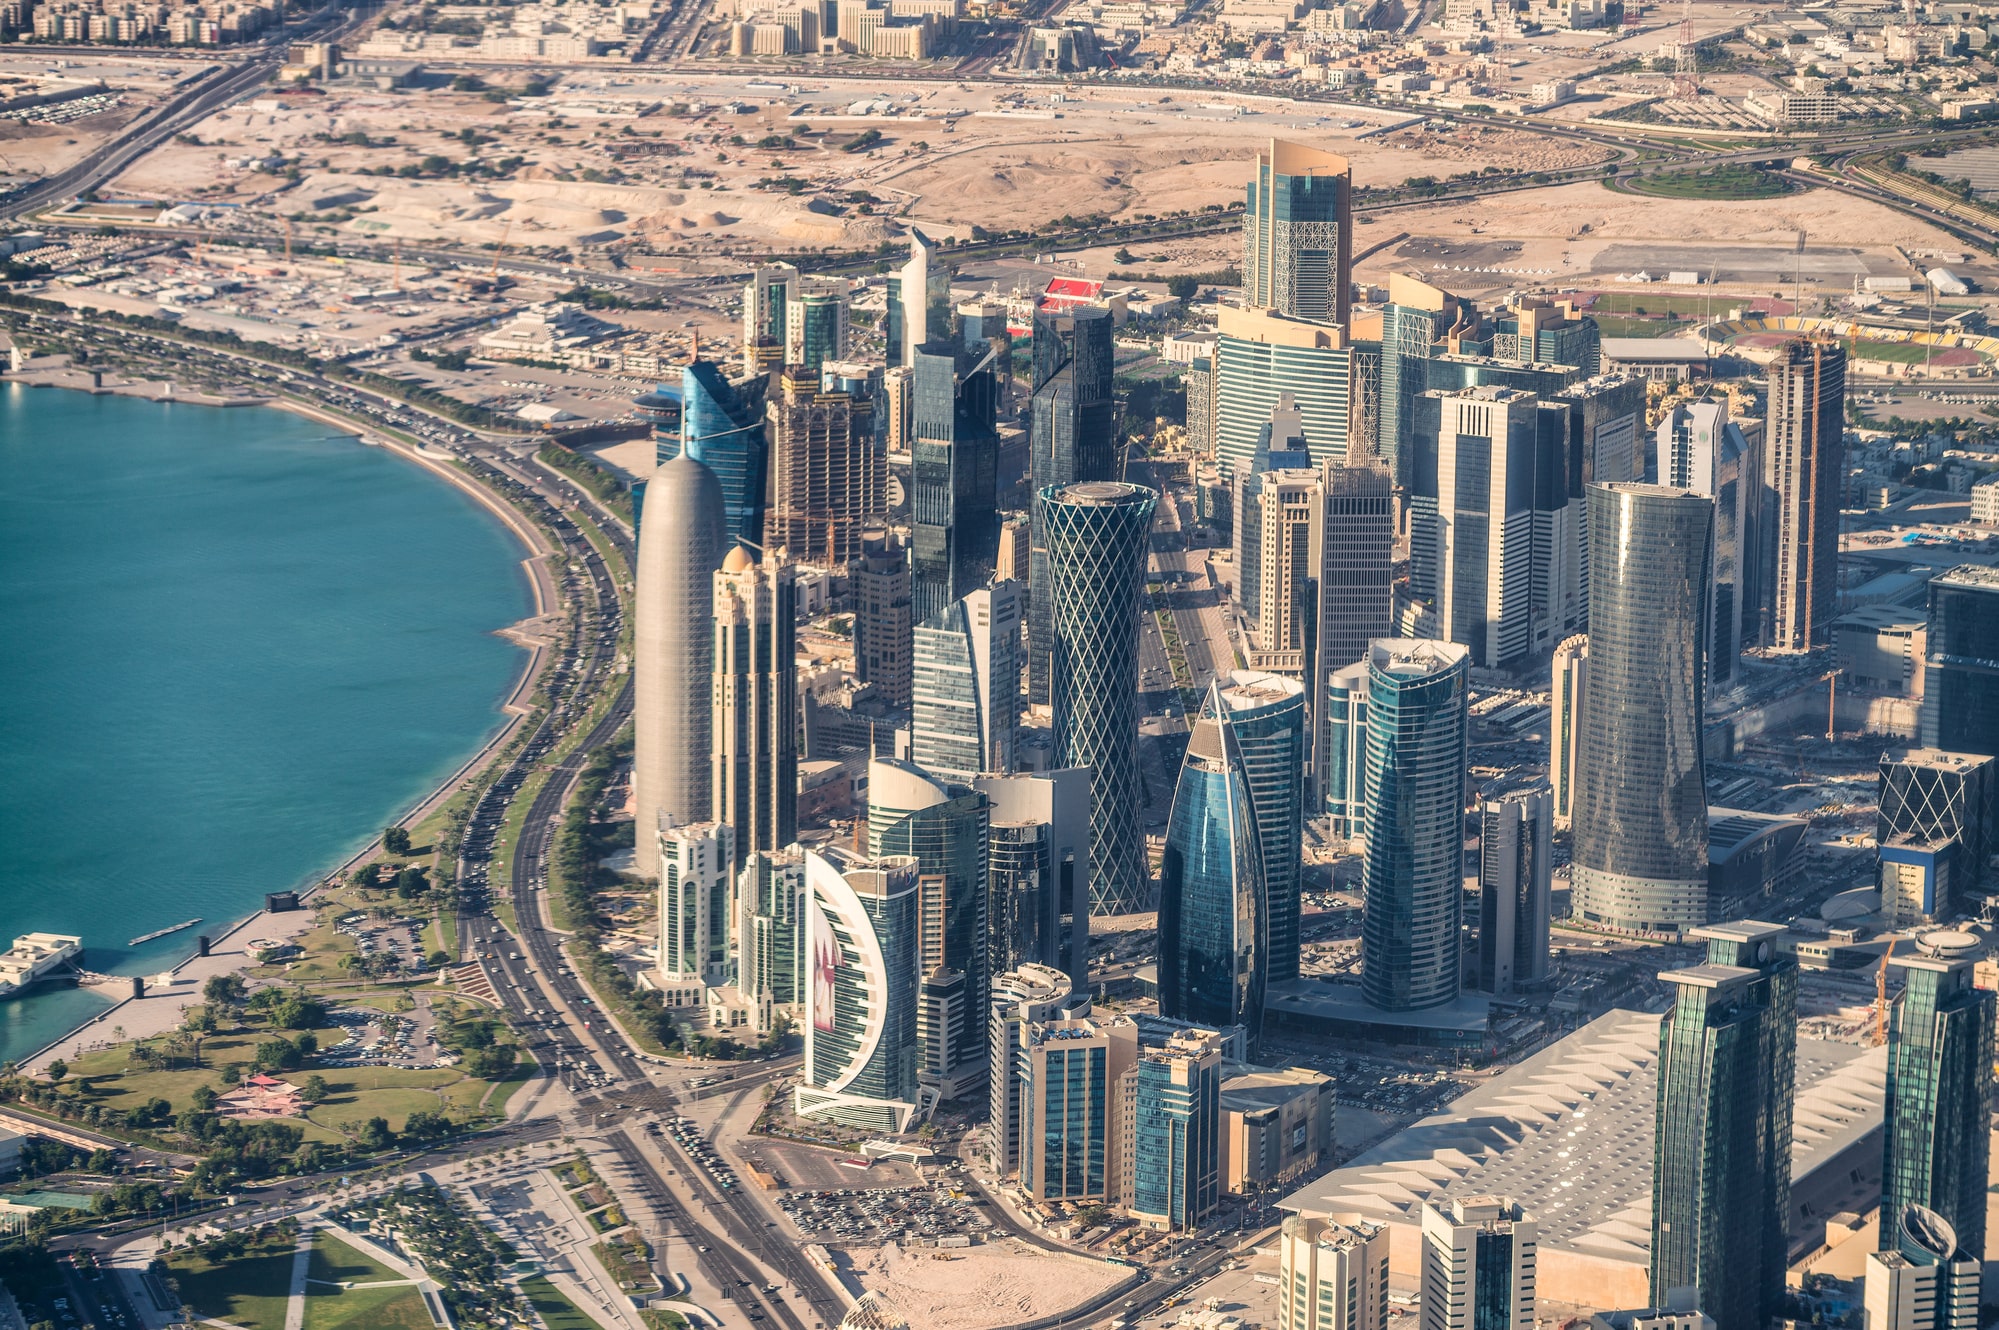 Qatar officials aim to attract Environmental,  Social, and Corporate Governance sensitive investments